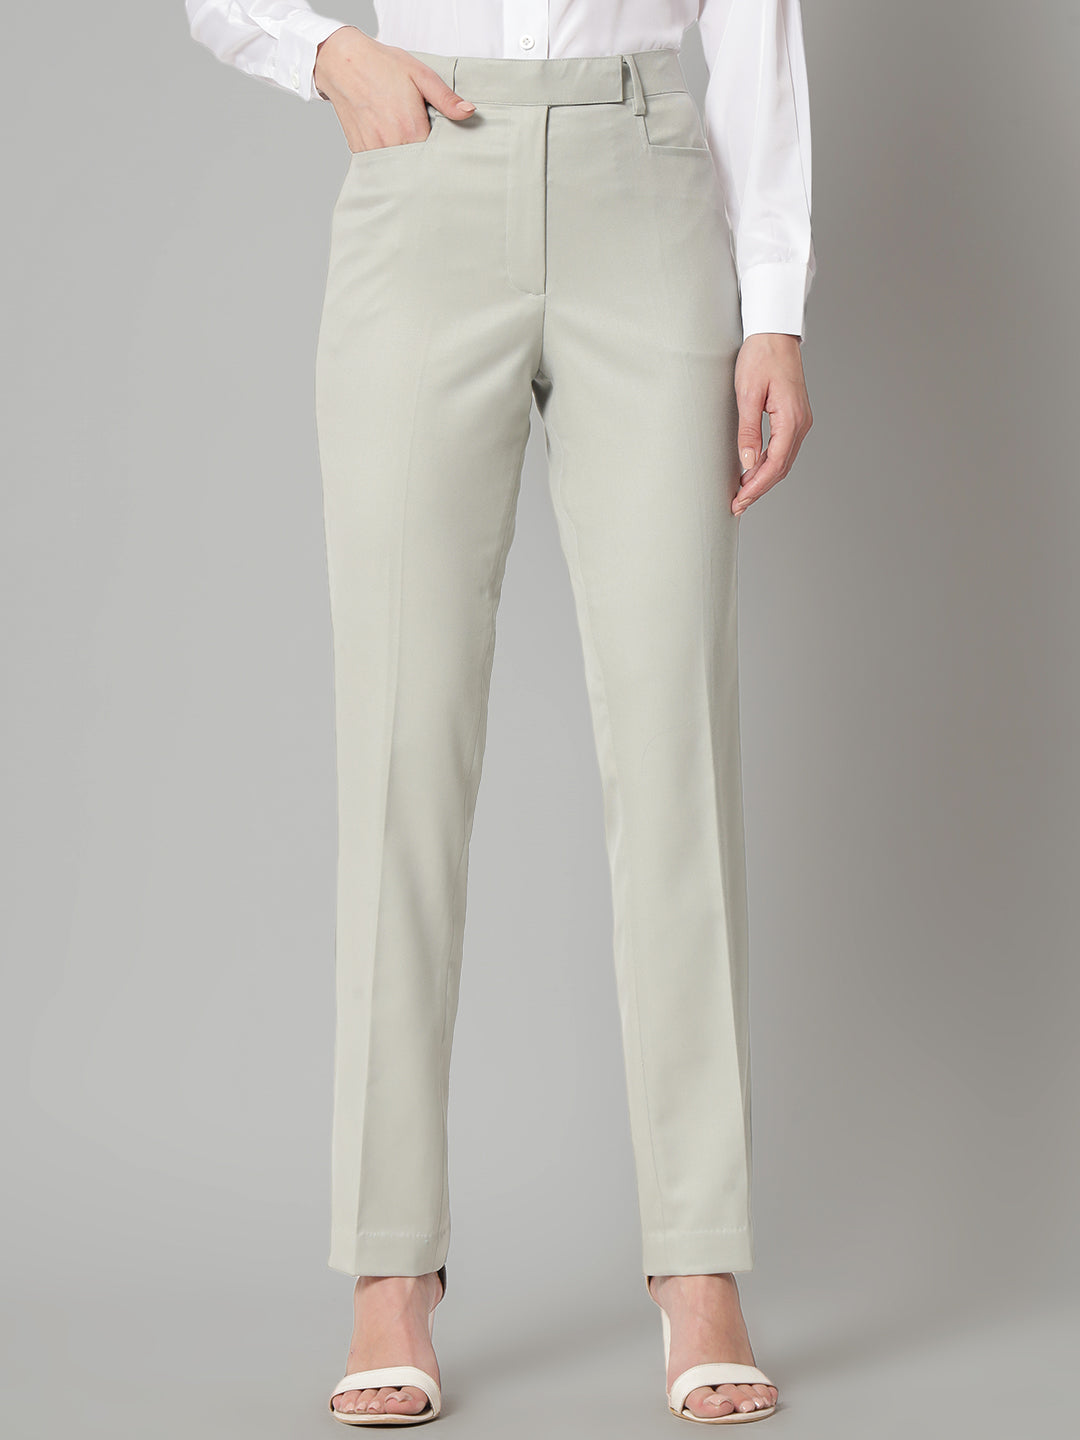 Black Suit Trousers | Mens Suit Trousers | House of Fraser